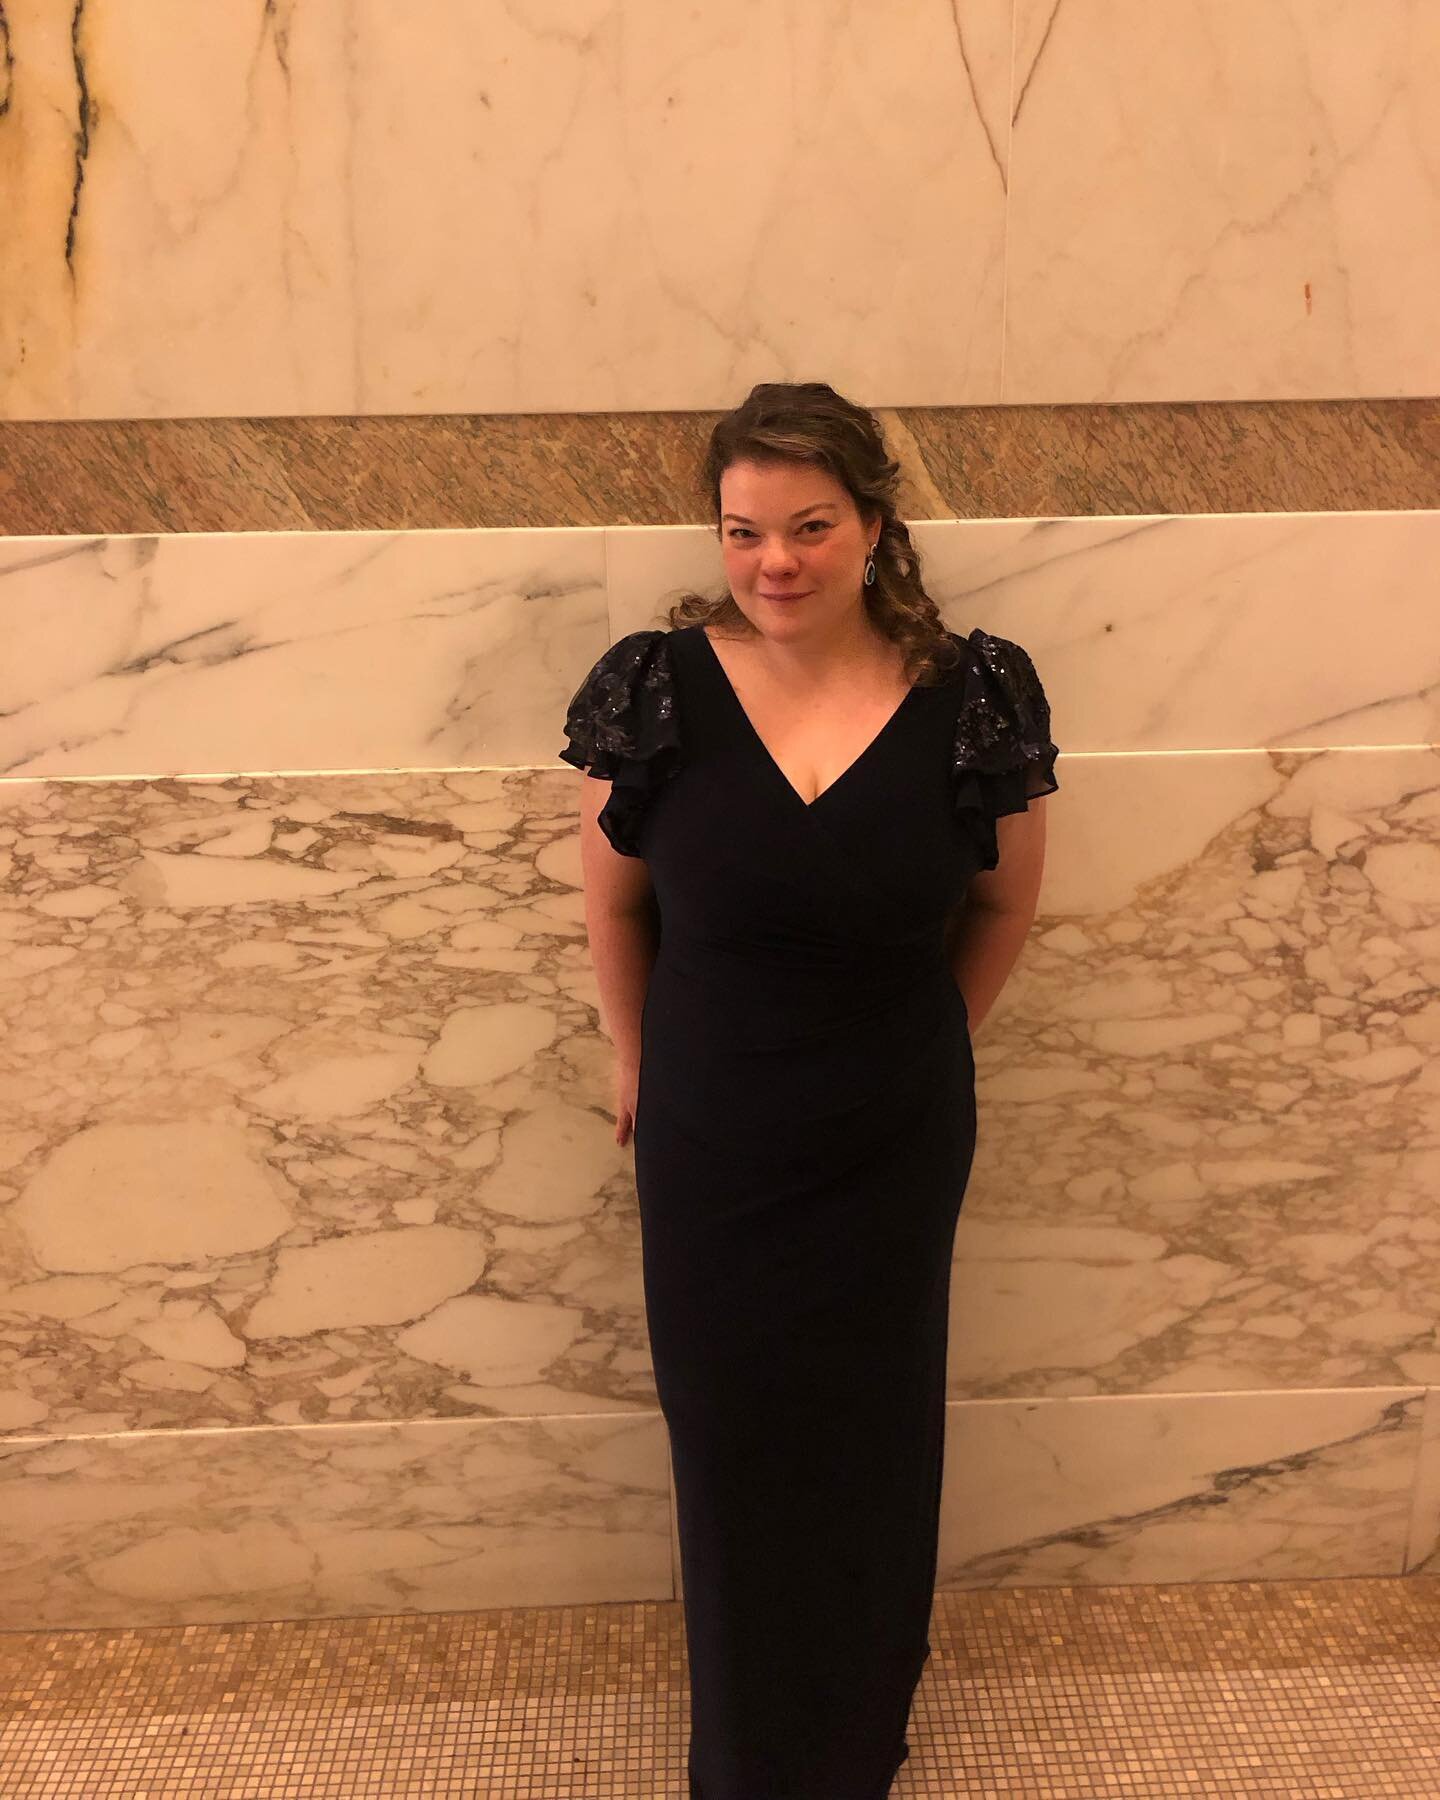 It was an amazing evening last night at @theplazahotel with @wnyc and @wqxr_classical at their beautiful gala. I was so grateful and privileged to be able to sing for an incredible music-loving audience, as well as share the stage with the most talen